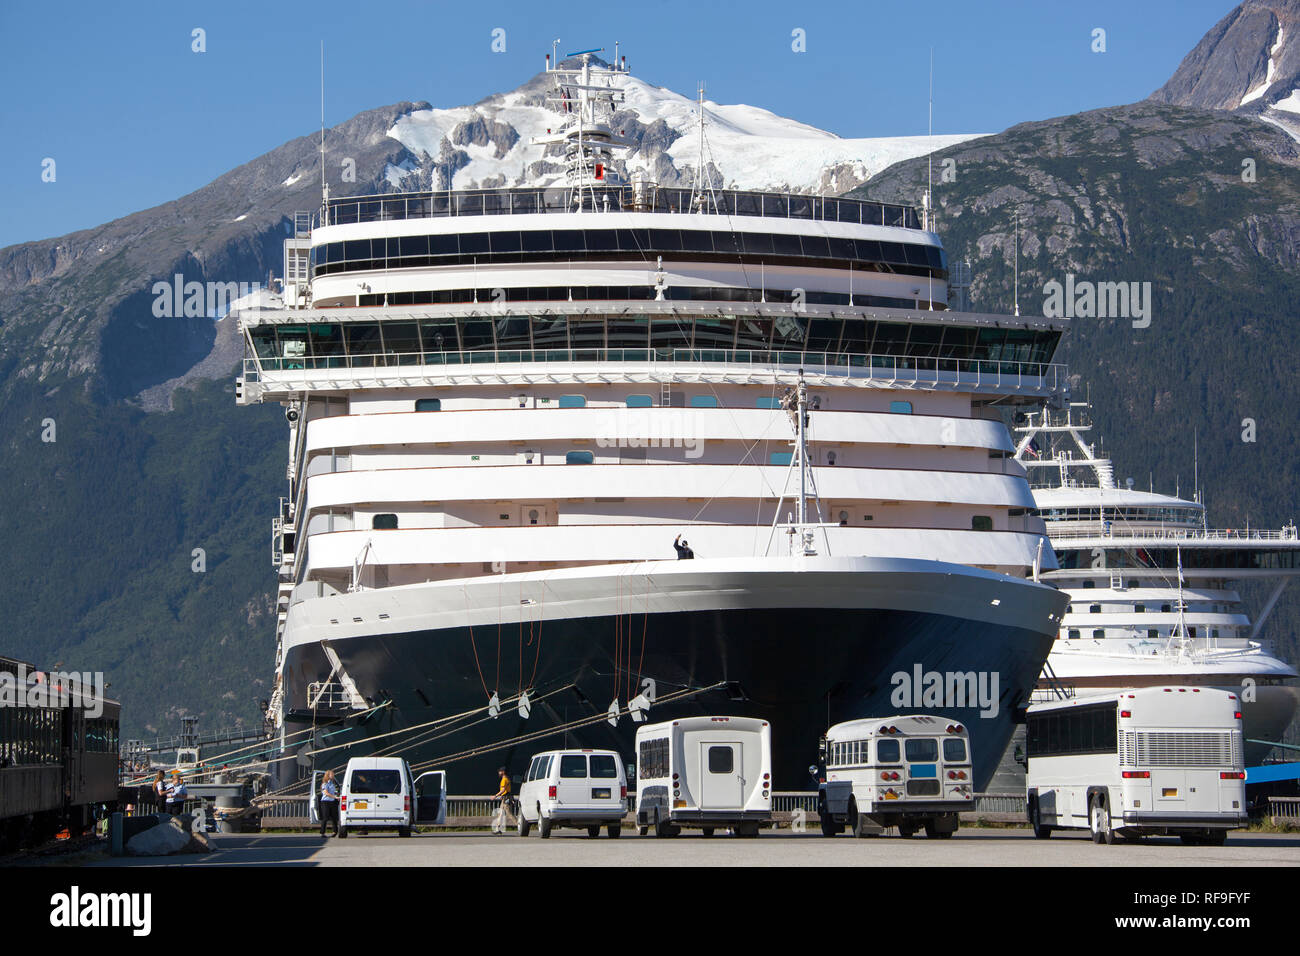 The morning view of land transportation next to giant cruise liner moored in Skagway town (Alaska). Stock Photo